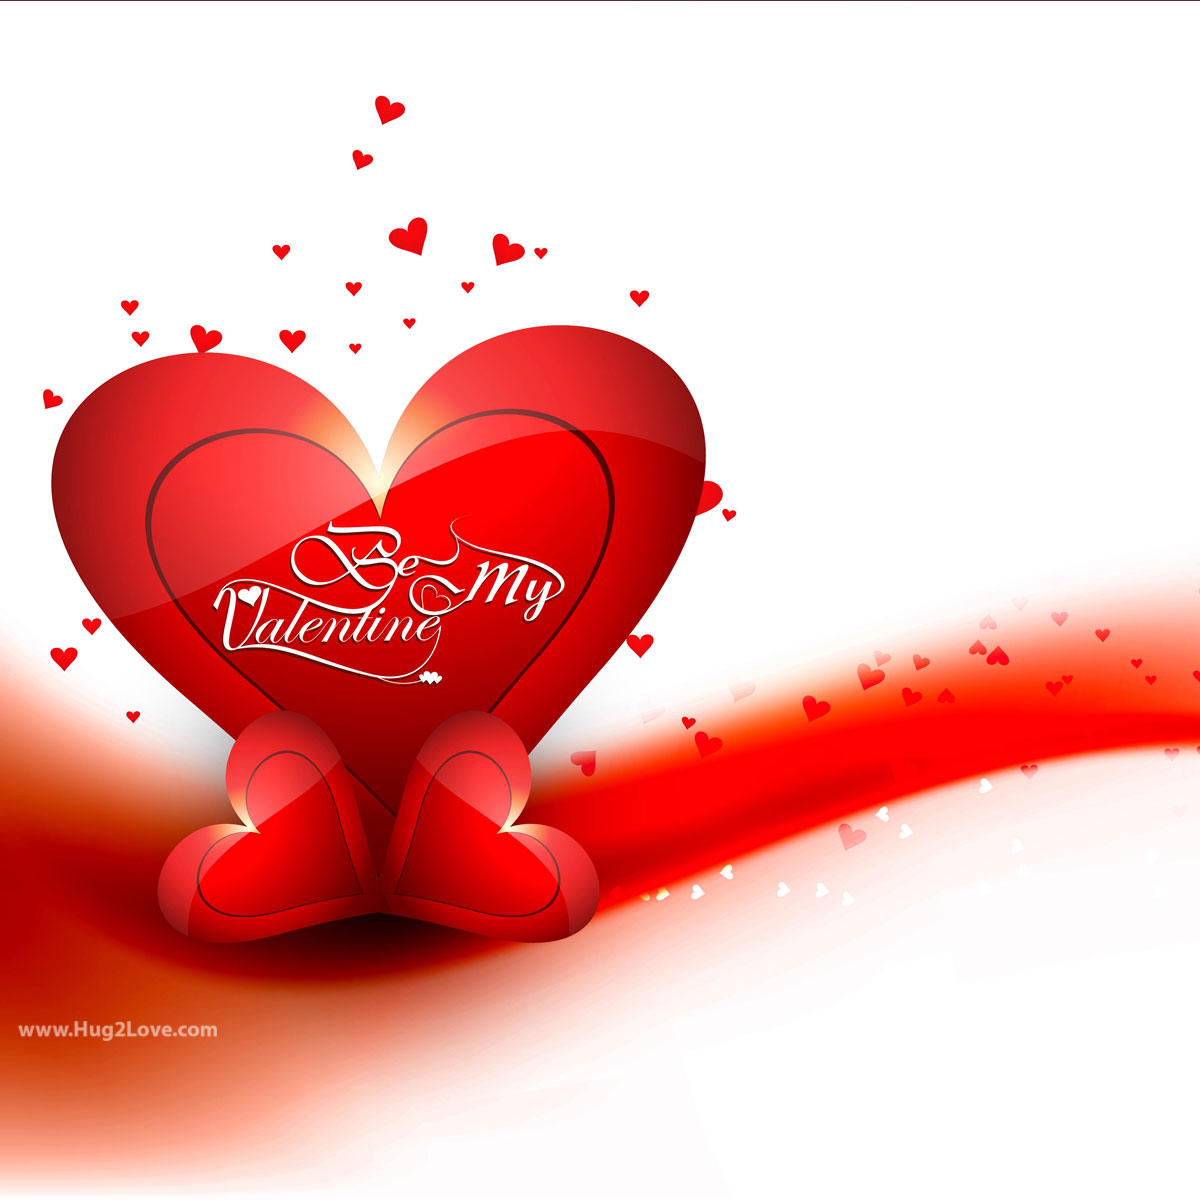 happy valentines day background images